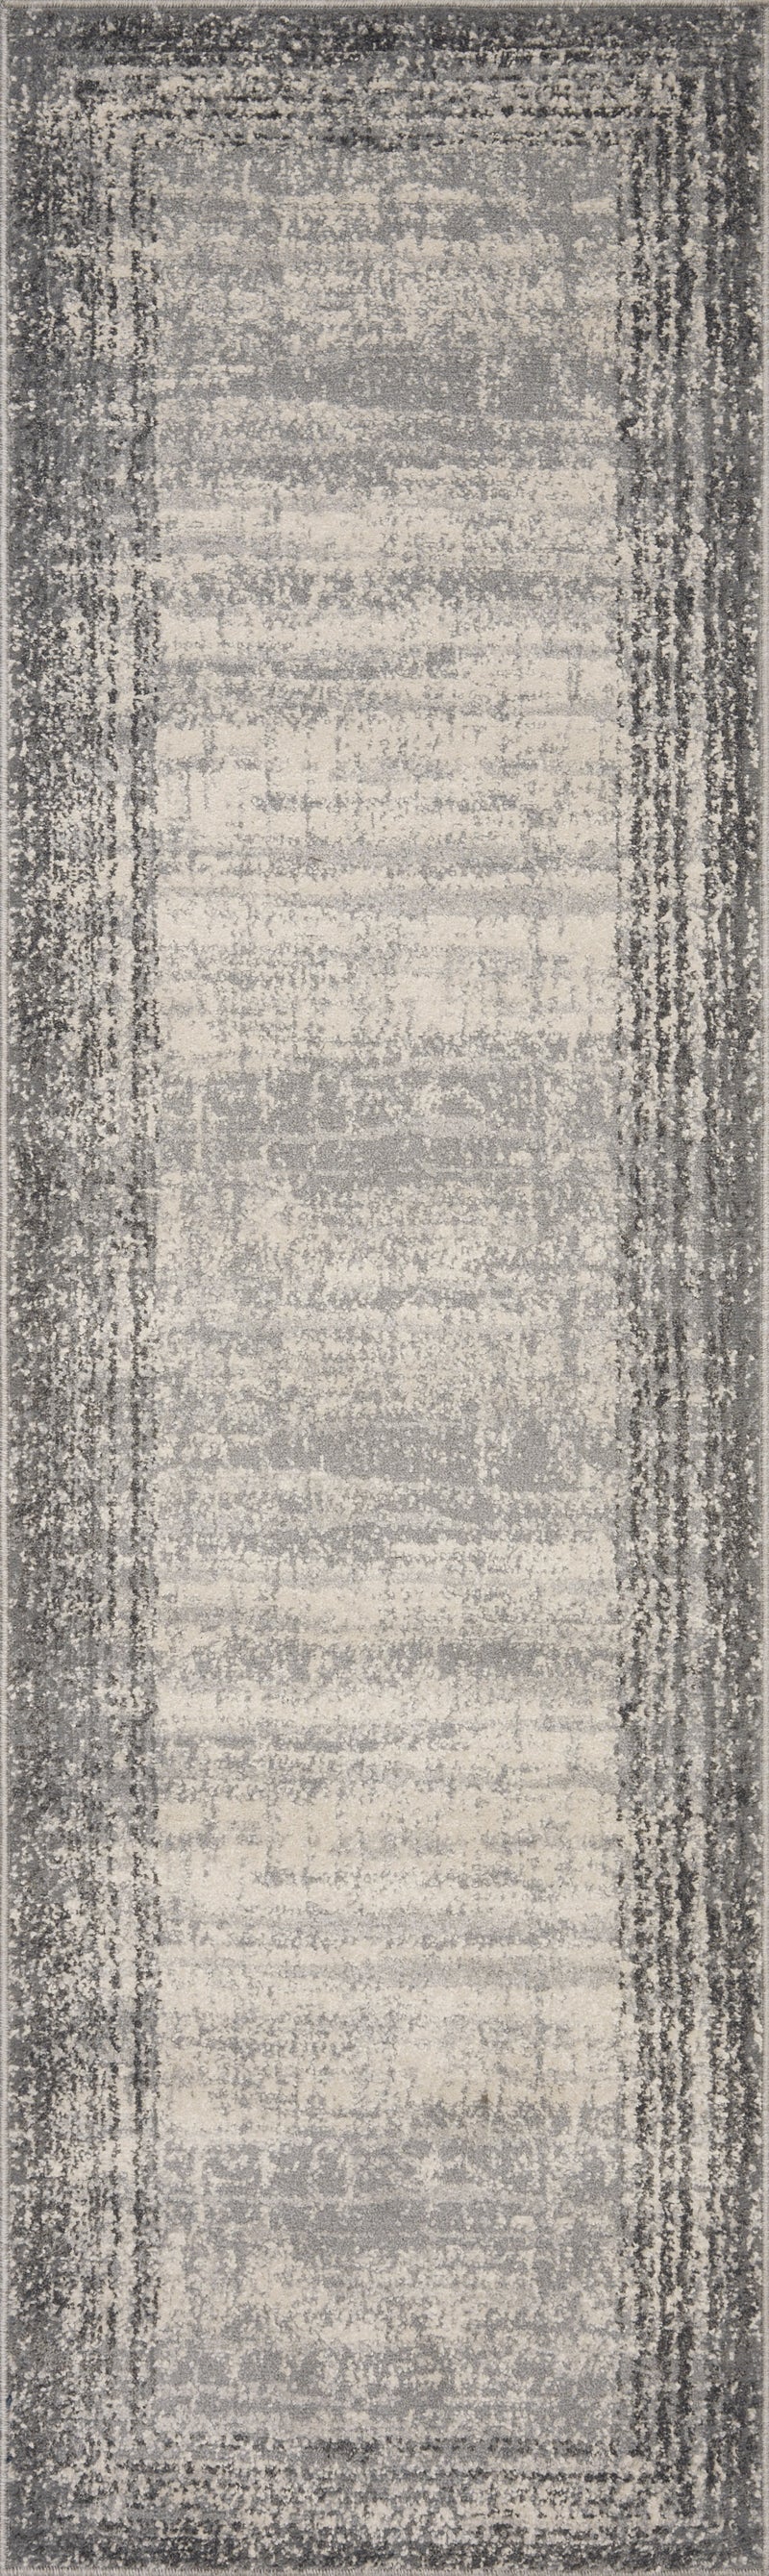 media image for Austen Rug in Pebble / Charcoal by Loloi II 220